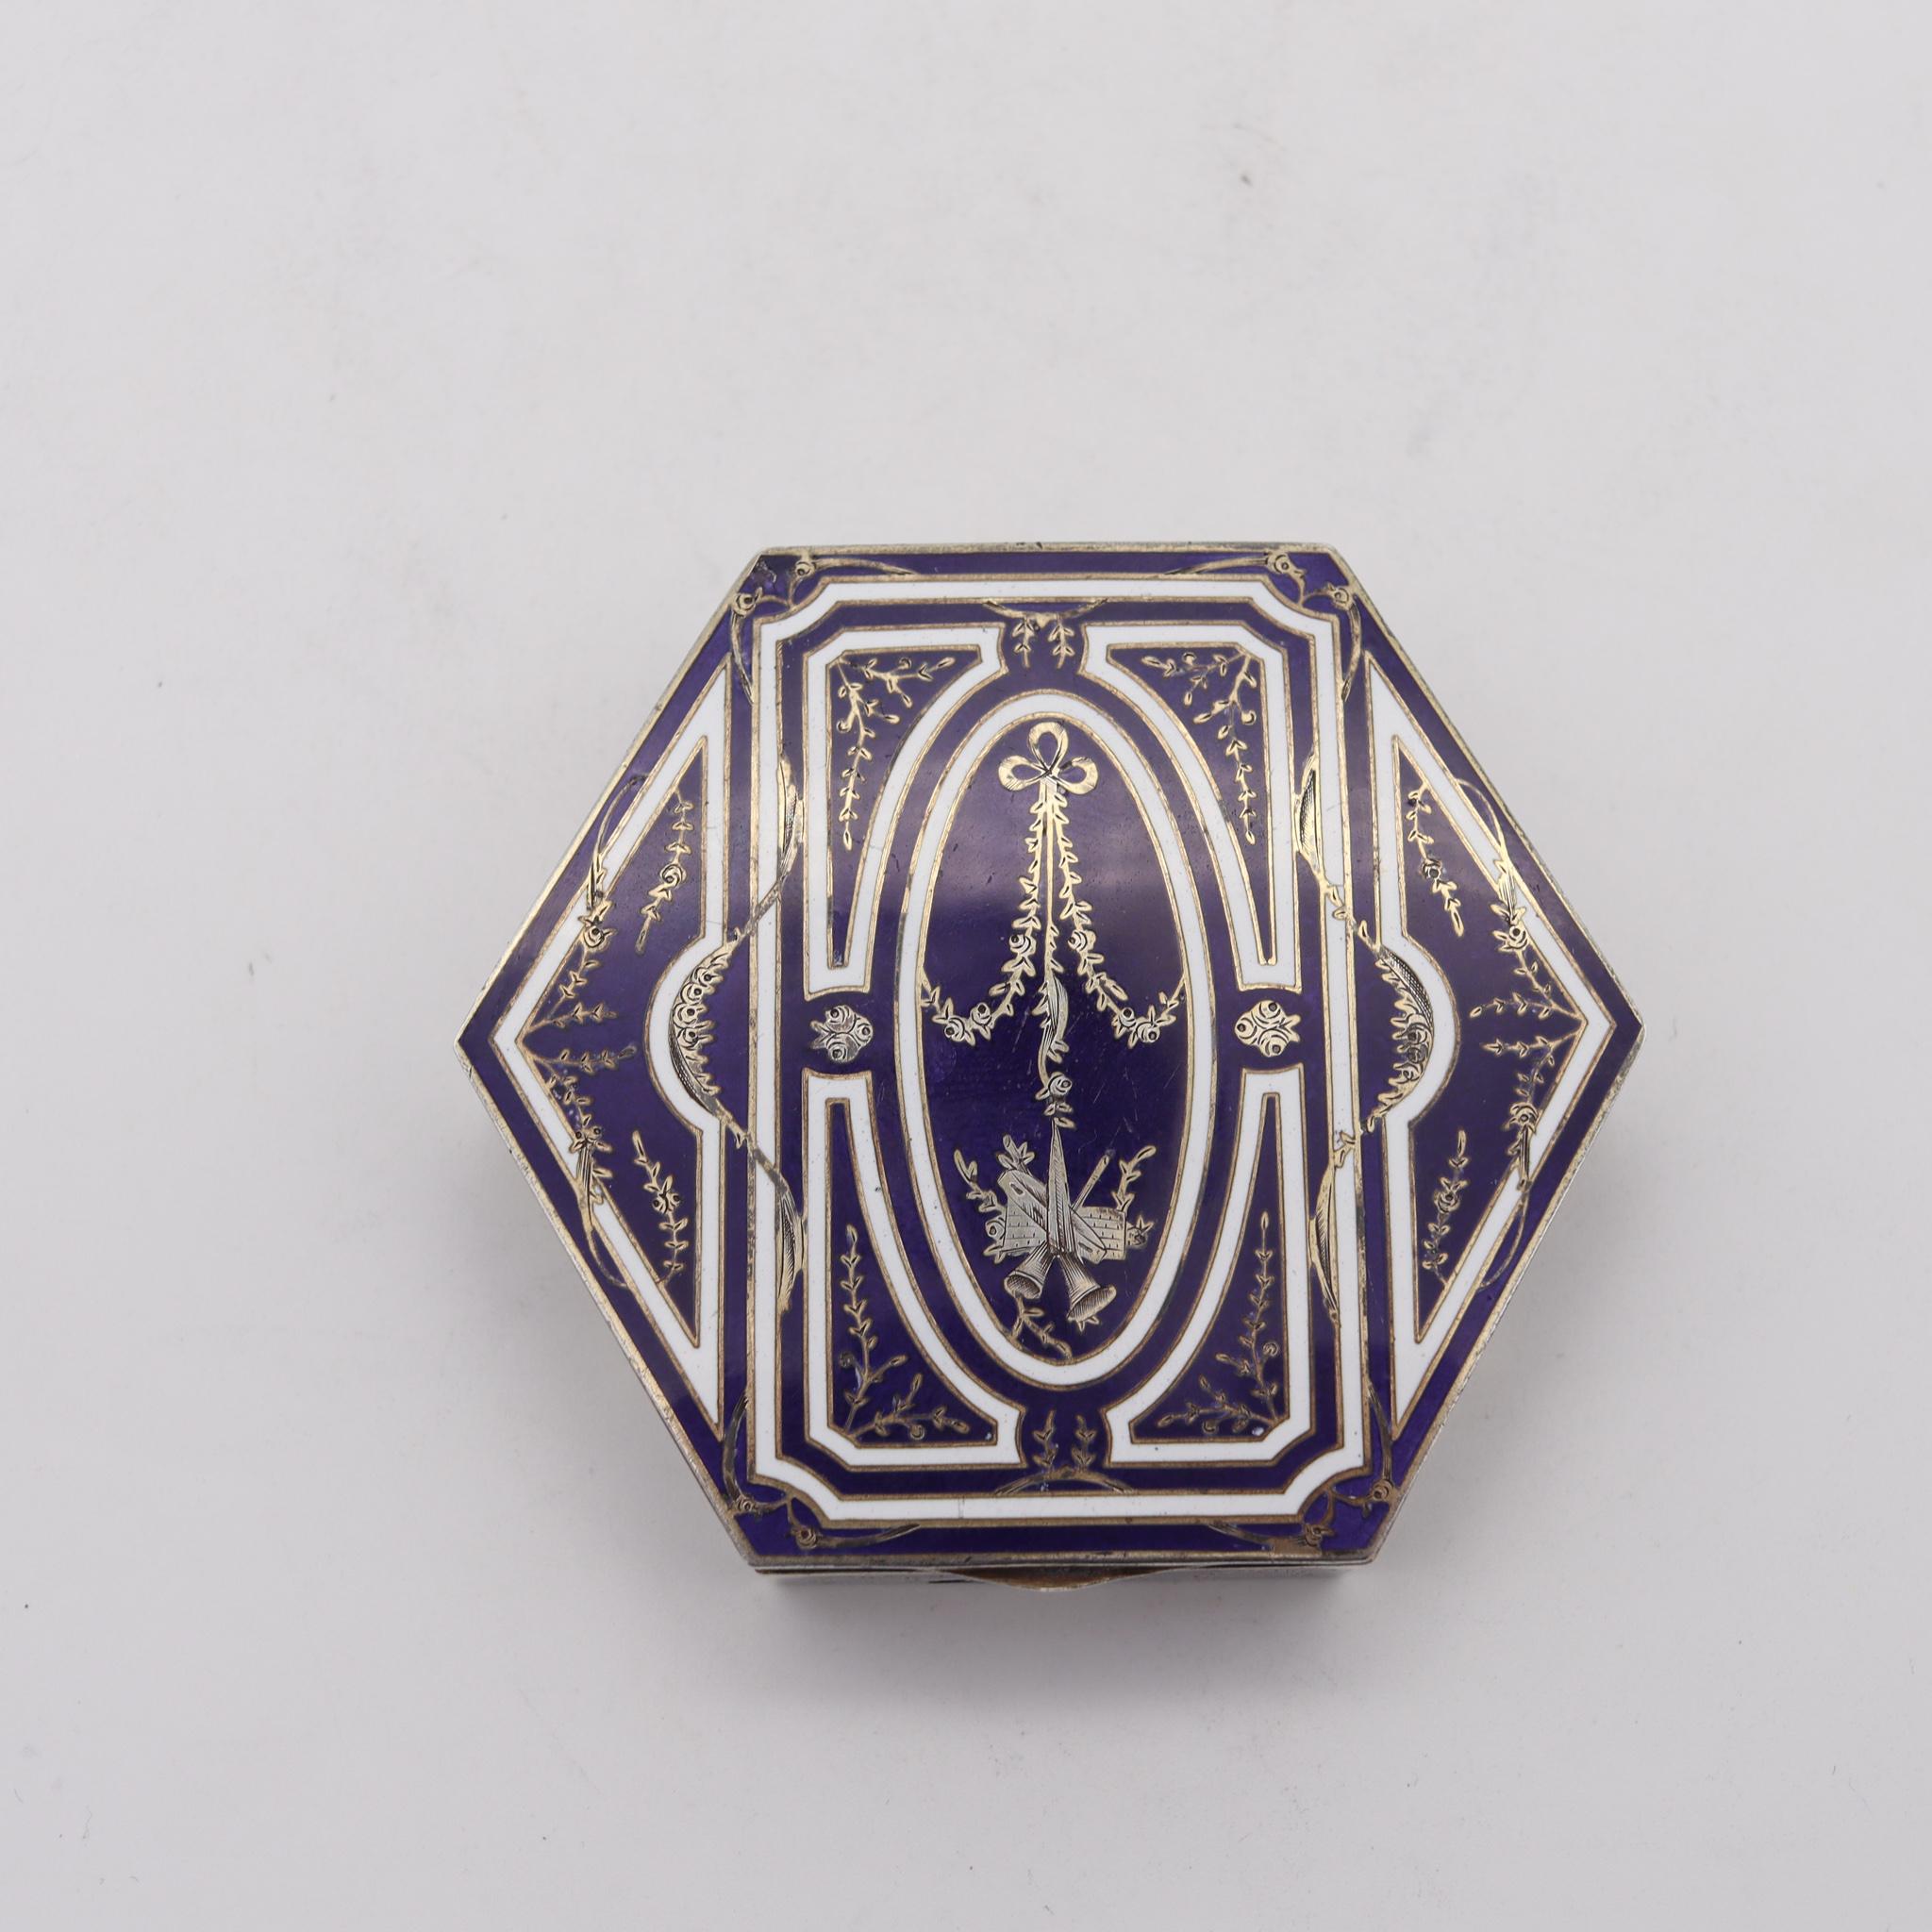 Enameled French 1905 Edwardian Hexagonal Snuff Box Sterling Silver with Guilloche Enamel For Sale